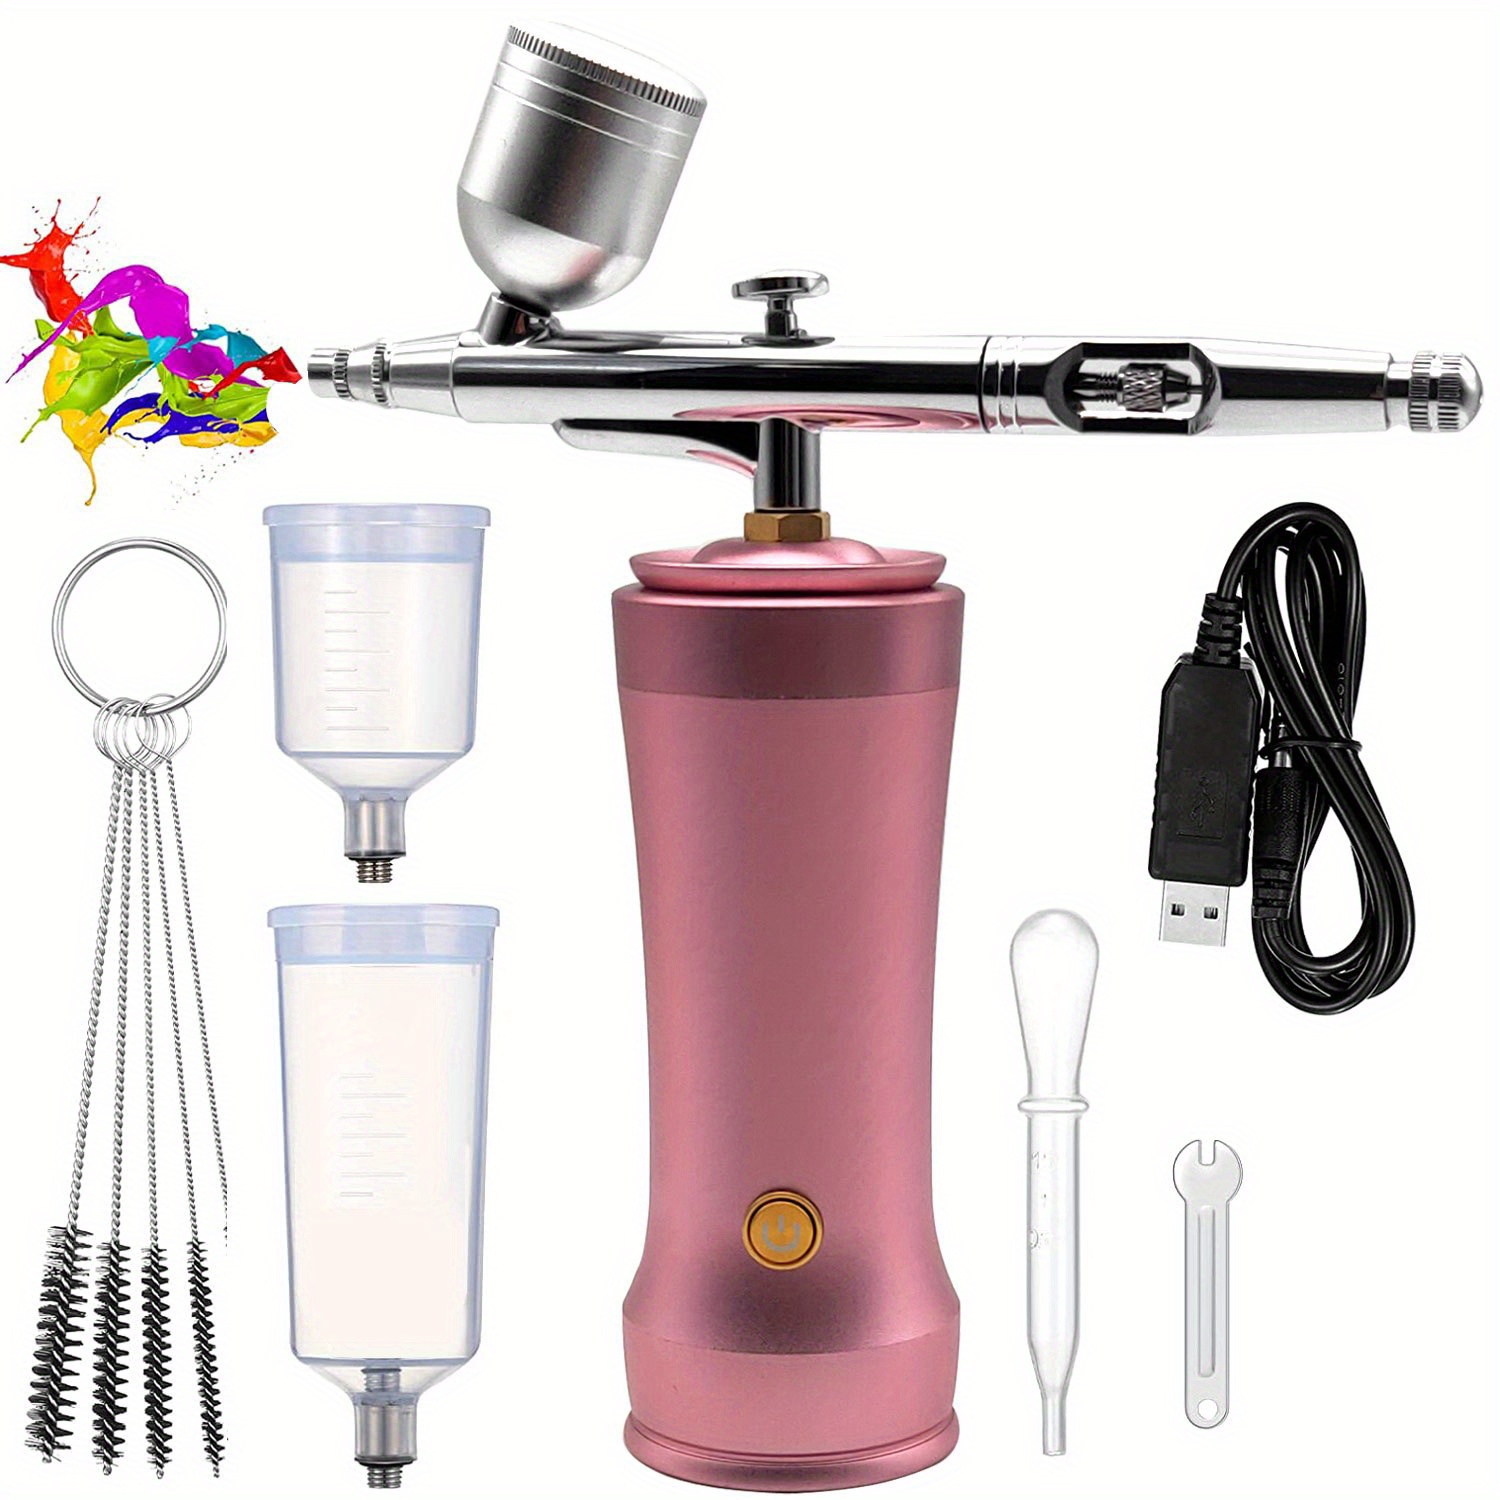 Airbrush-Kit Air Brush Kit With Airbrush Compressor Nail Charms Wireless  Air Brush for Barber, Nail Art, Cake Decor, Makeup, Model Painting (Pink)